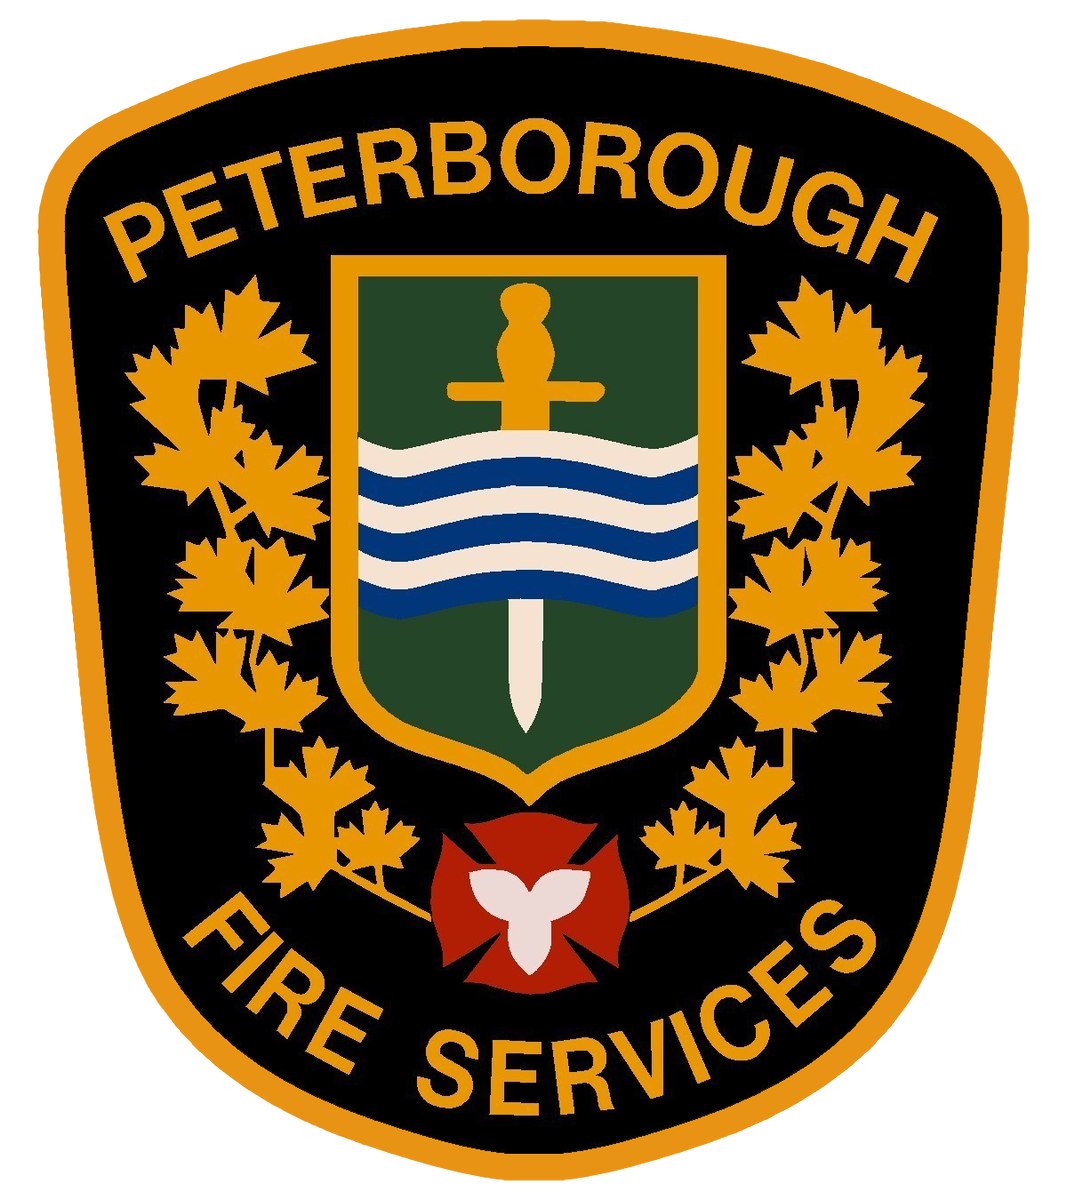 A dryer malfunction is being blamed for a house fire in Peterborough on Friday morning.